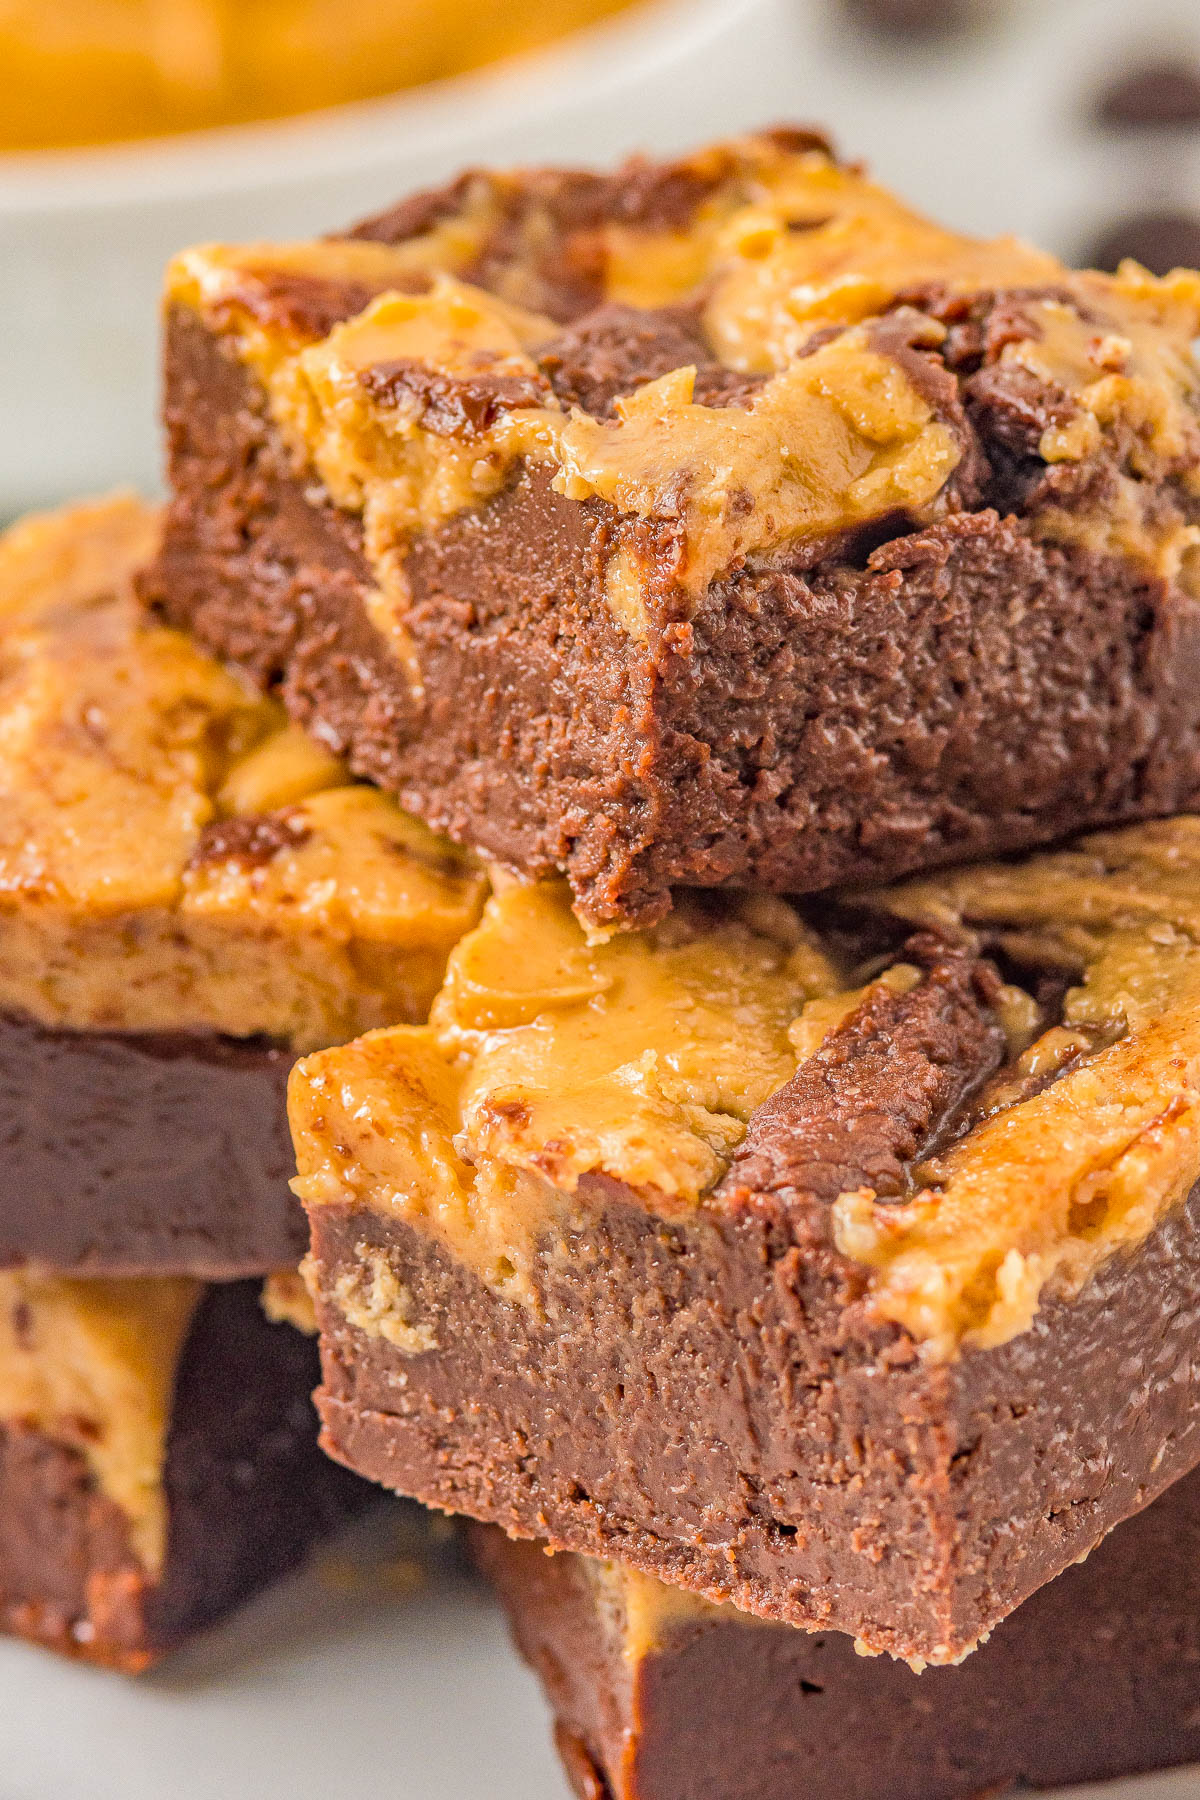 Chocolate Peanut Butter Fudge - Rich and decadent chocolate fudge adorned with peanut butter swirls! Made in the microwave with just SIX ingredients, there's no boiling or candy thermometers involved in this FAST and EASY recipe for PERFECT fudge every time! Make it in advance, it keeps for weeks, and it's great for gifting and holiday entertaining! 